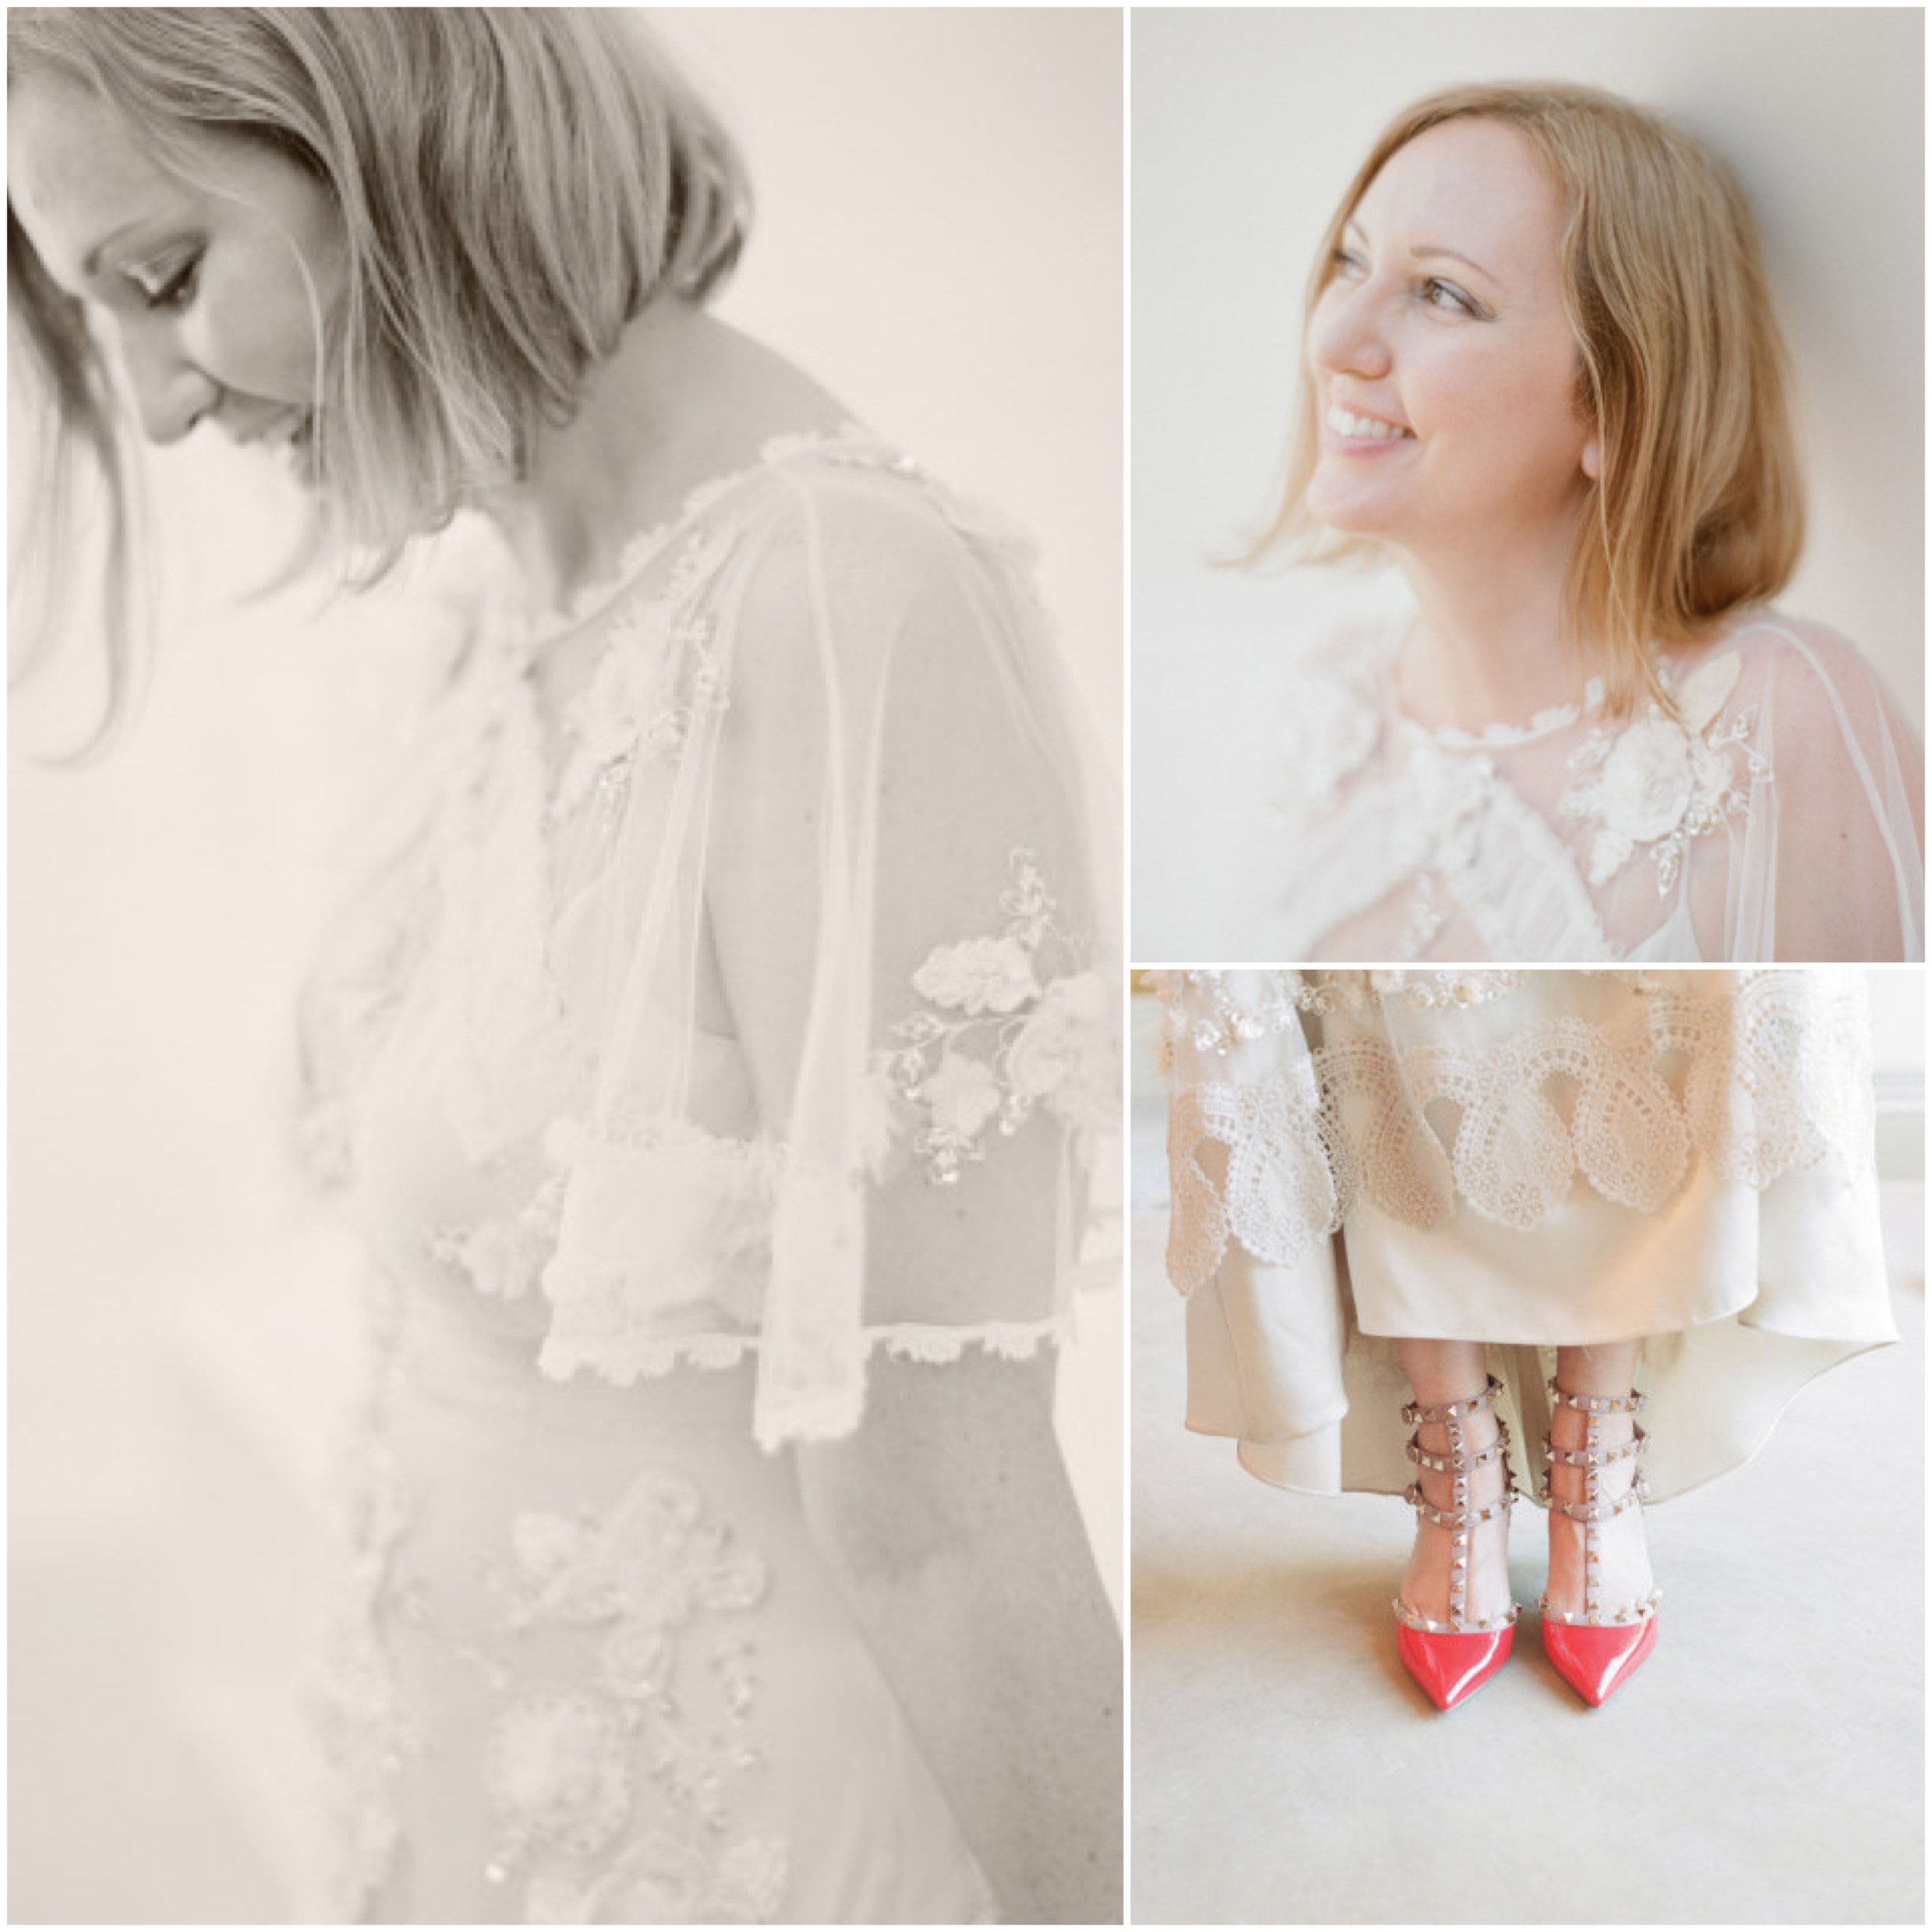 Images from Claire Pettibone's feature on Style Me Pretty